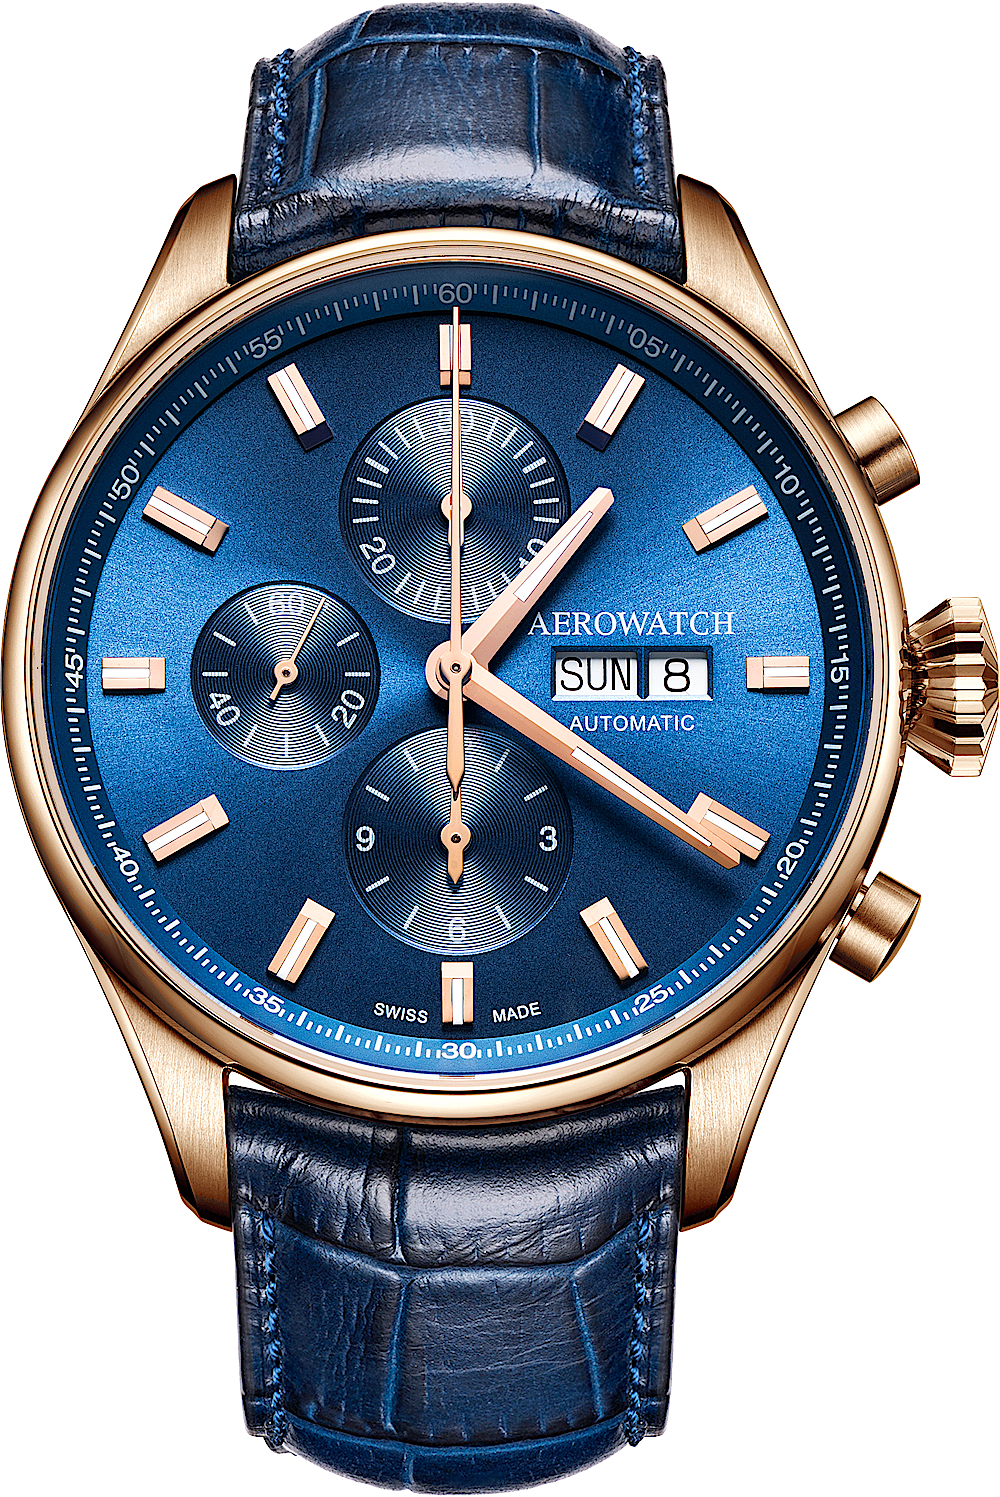 Aerowatch Aerowatch Les Grandes Classiques Chrono Day-Date